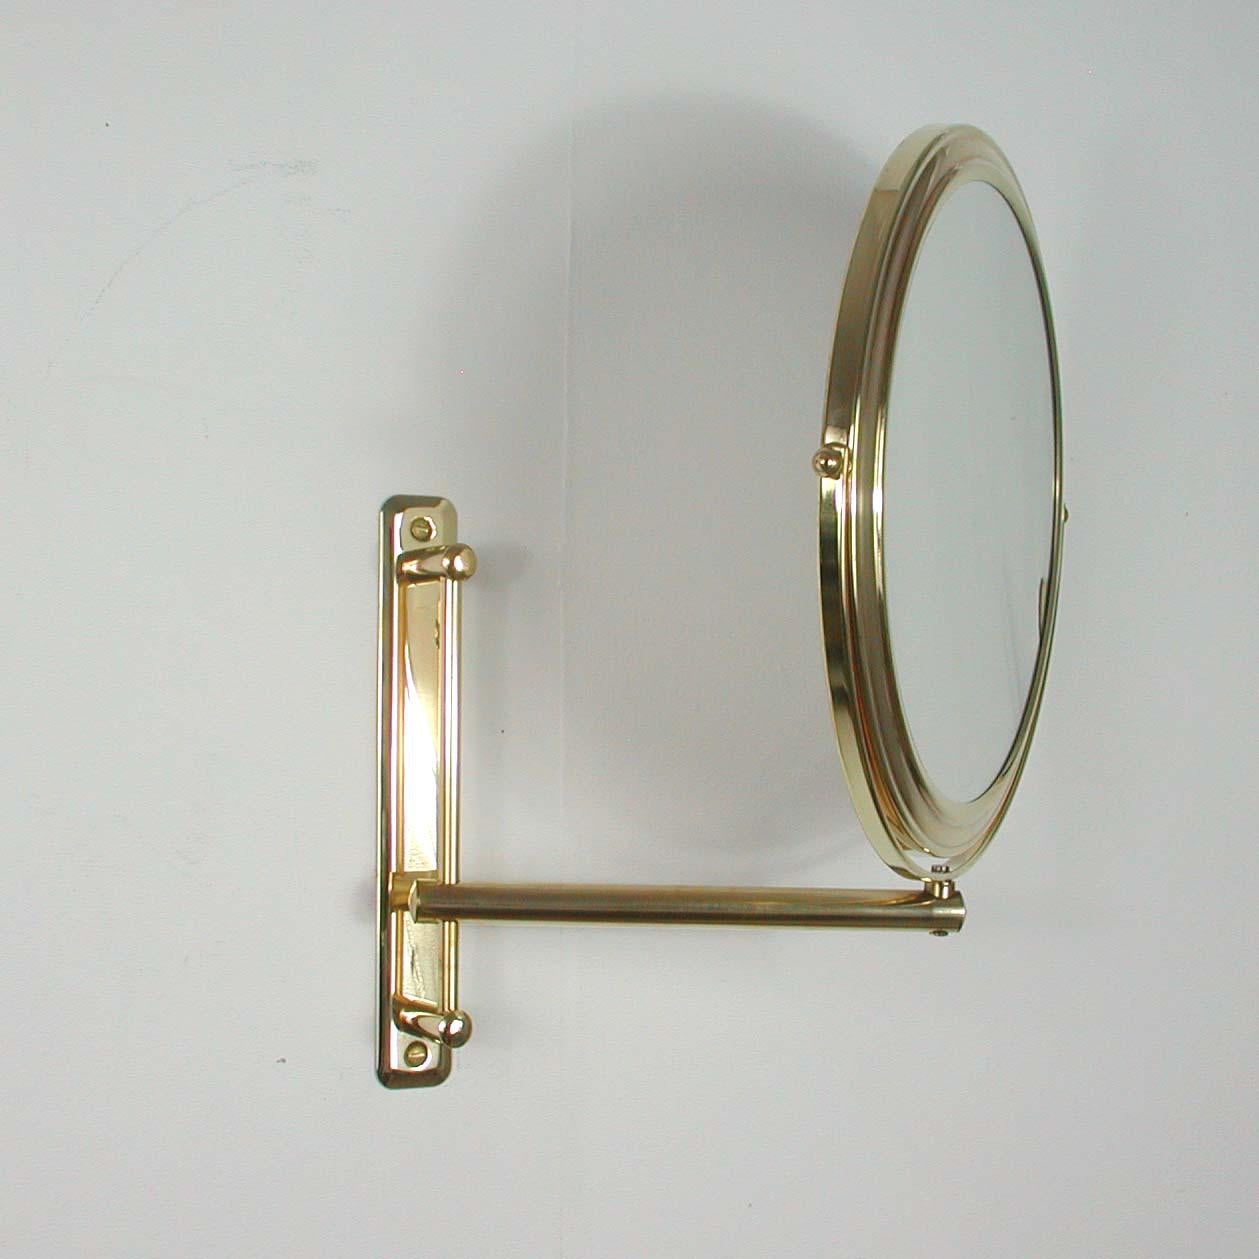 Italian Articulating and Adjustable Brass Vanity 2-Sided Wall Mirror, 1950s For Sale 2